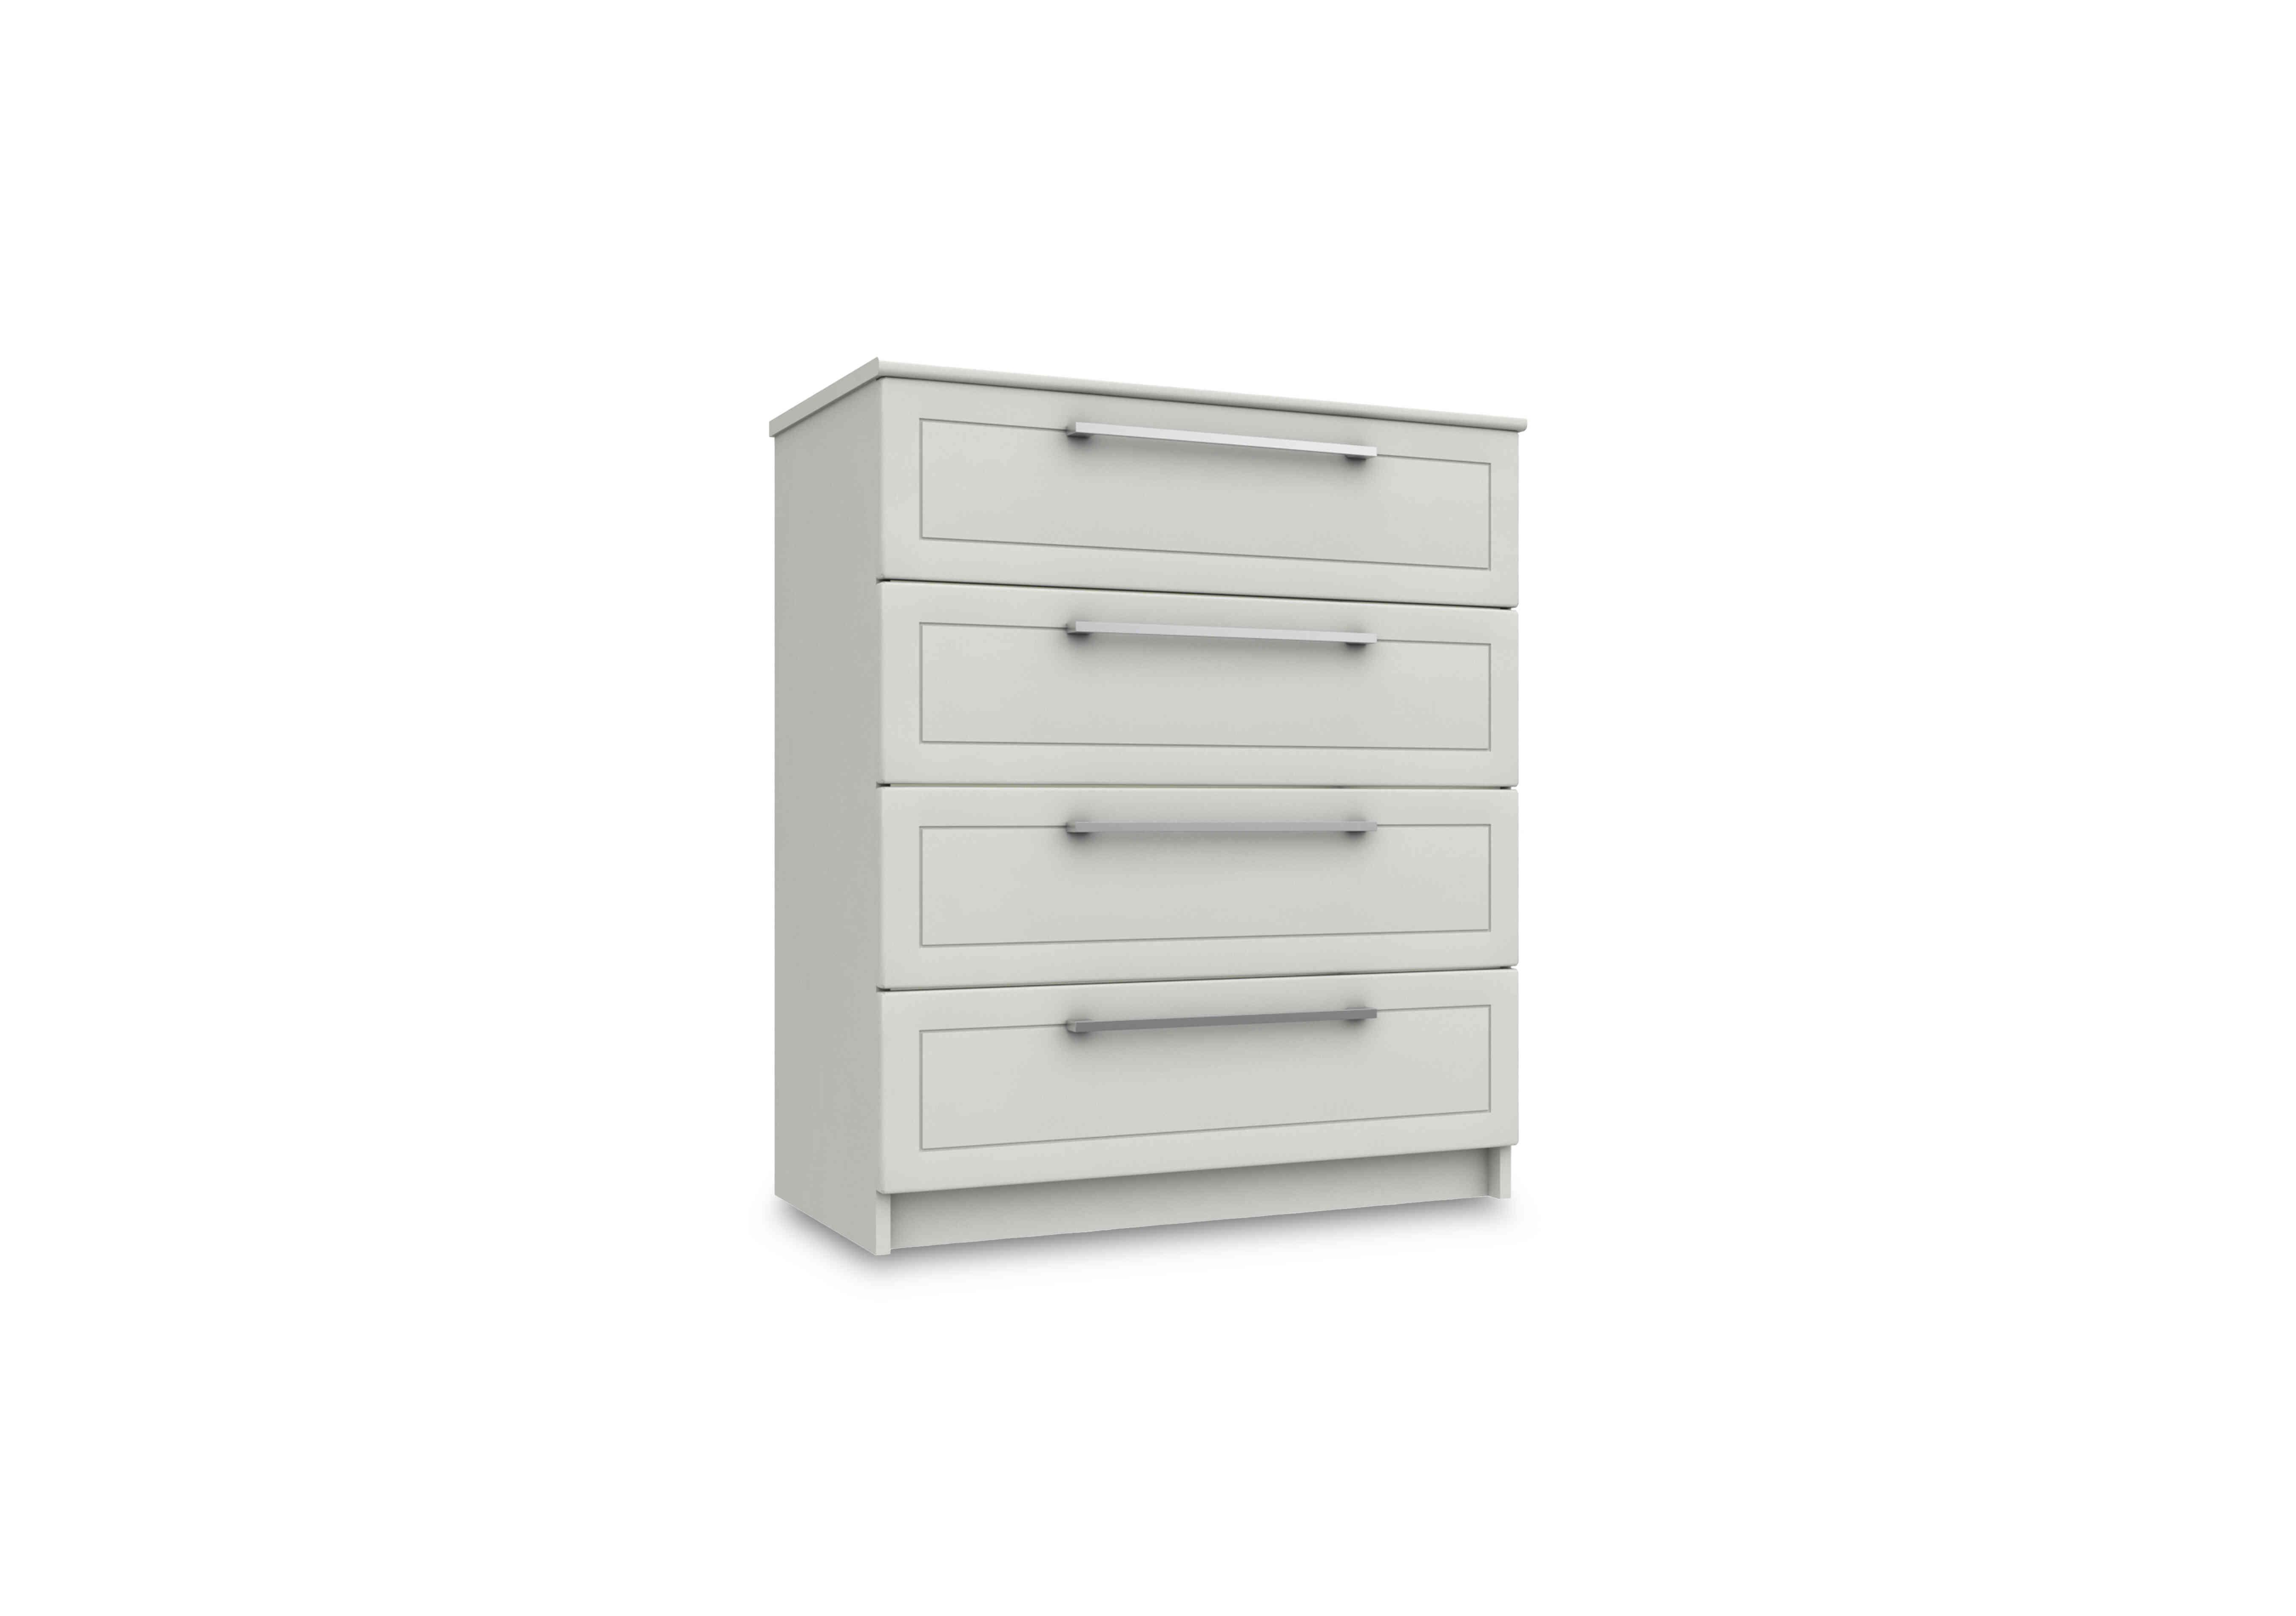 Bexley 4 Drawer Chest in White Gloss on Furniture Village